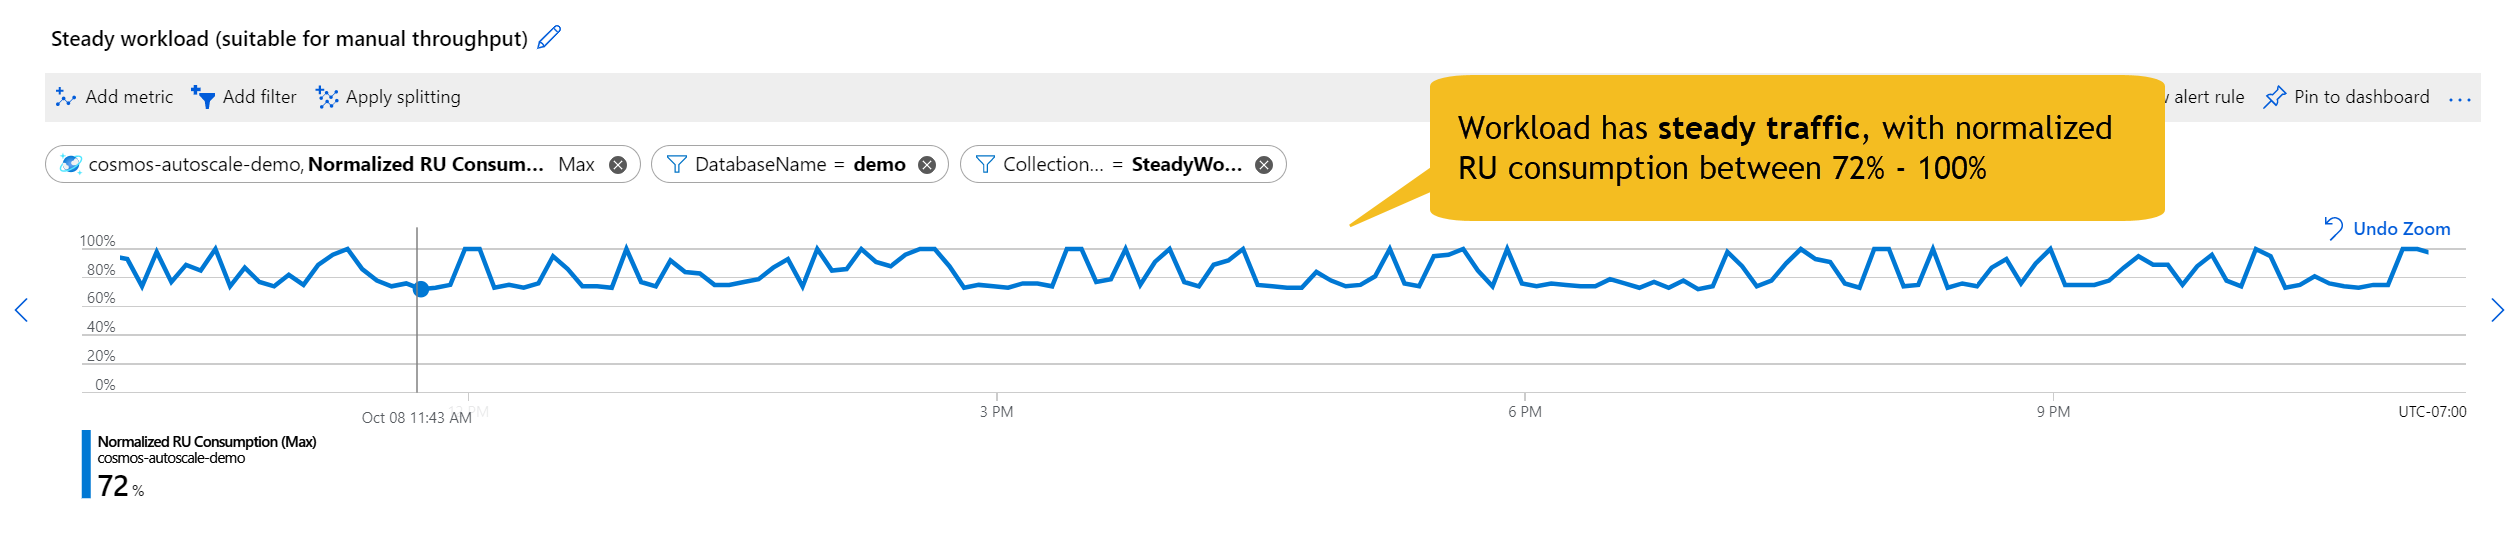 Workload with steady traffic - normalized RU consumption between 72% and 100% for all hours